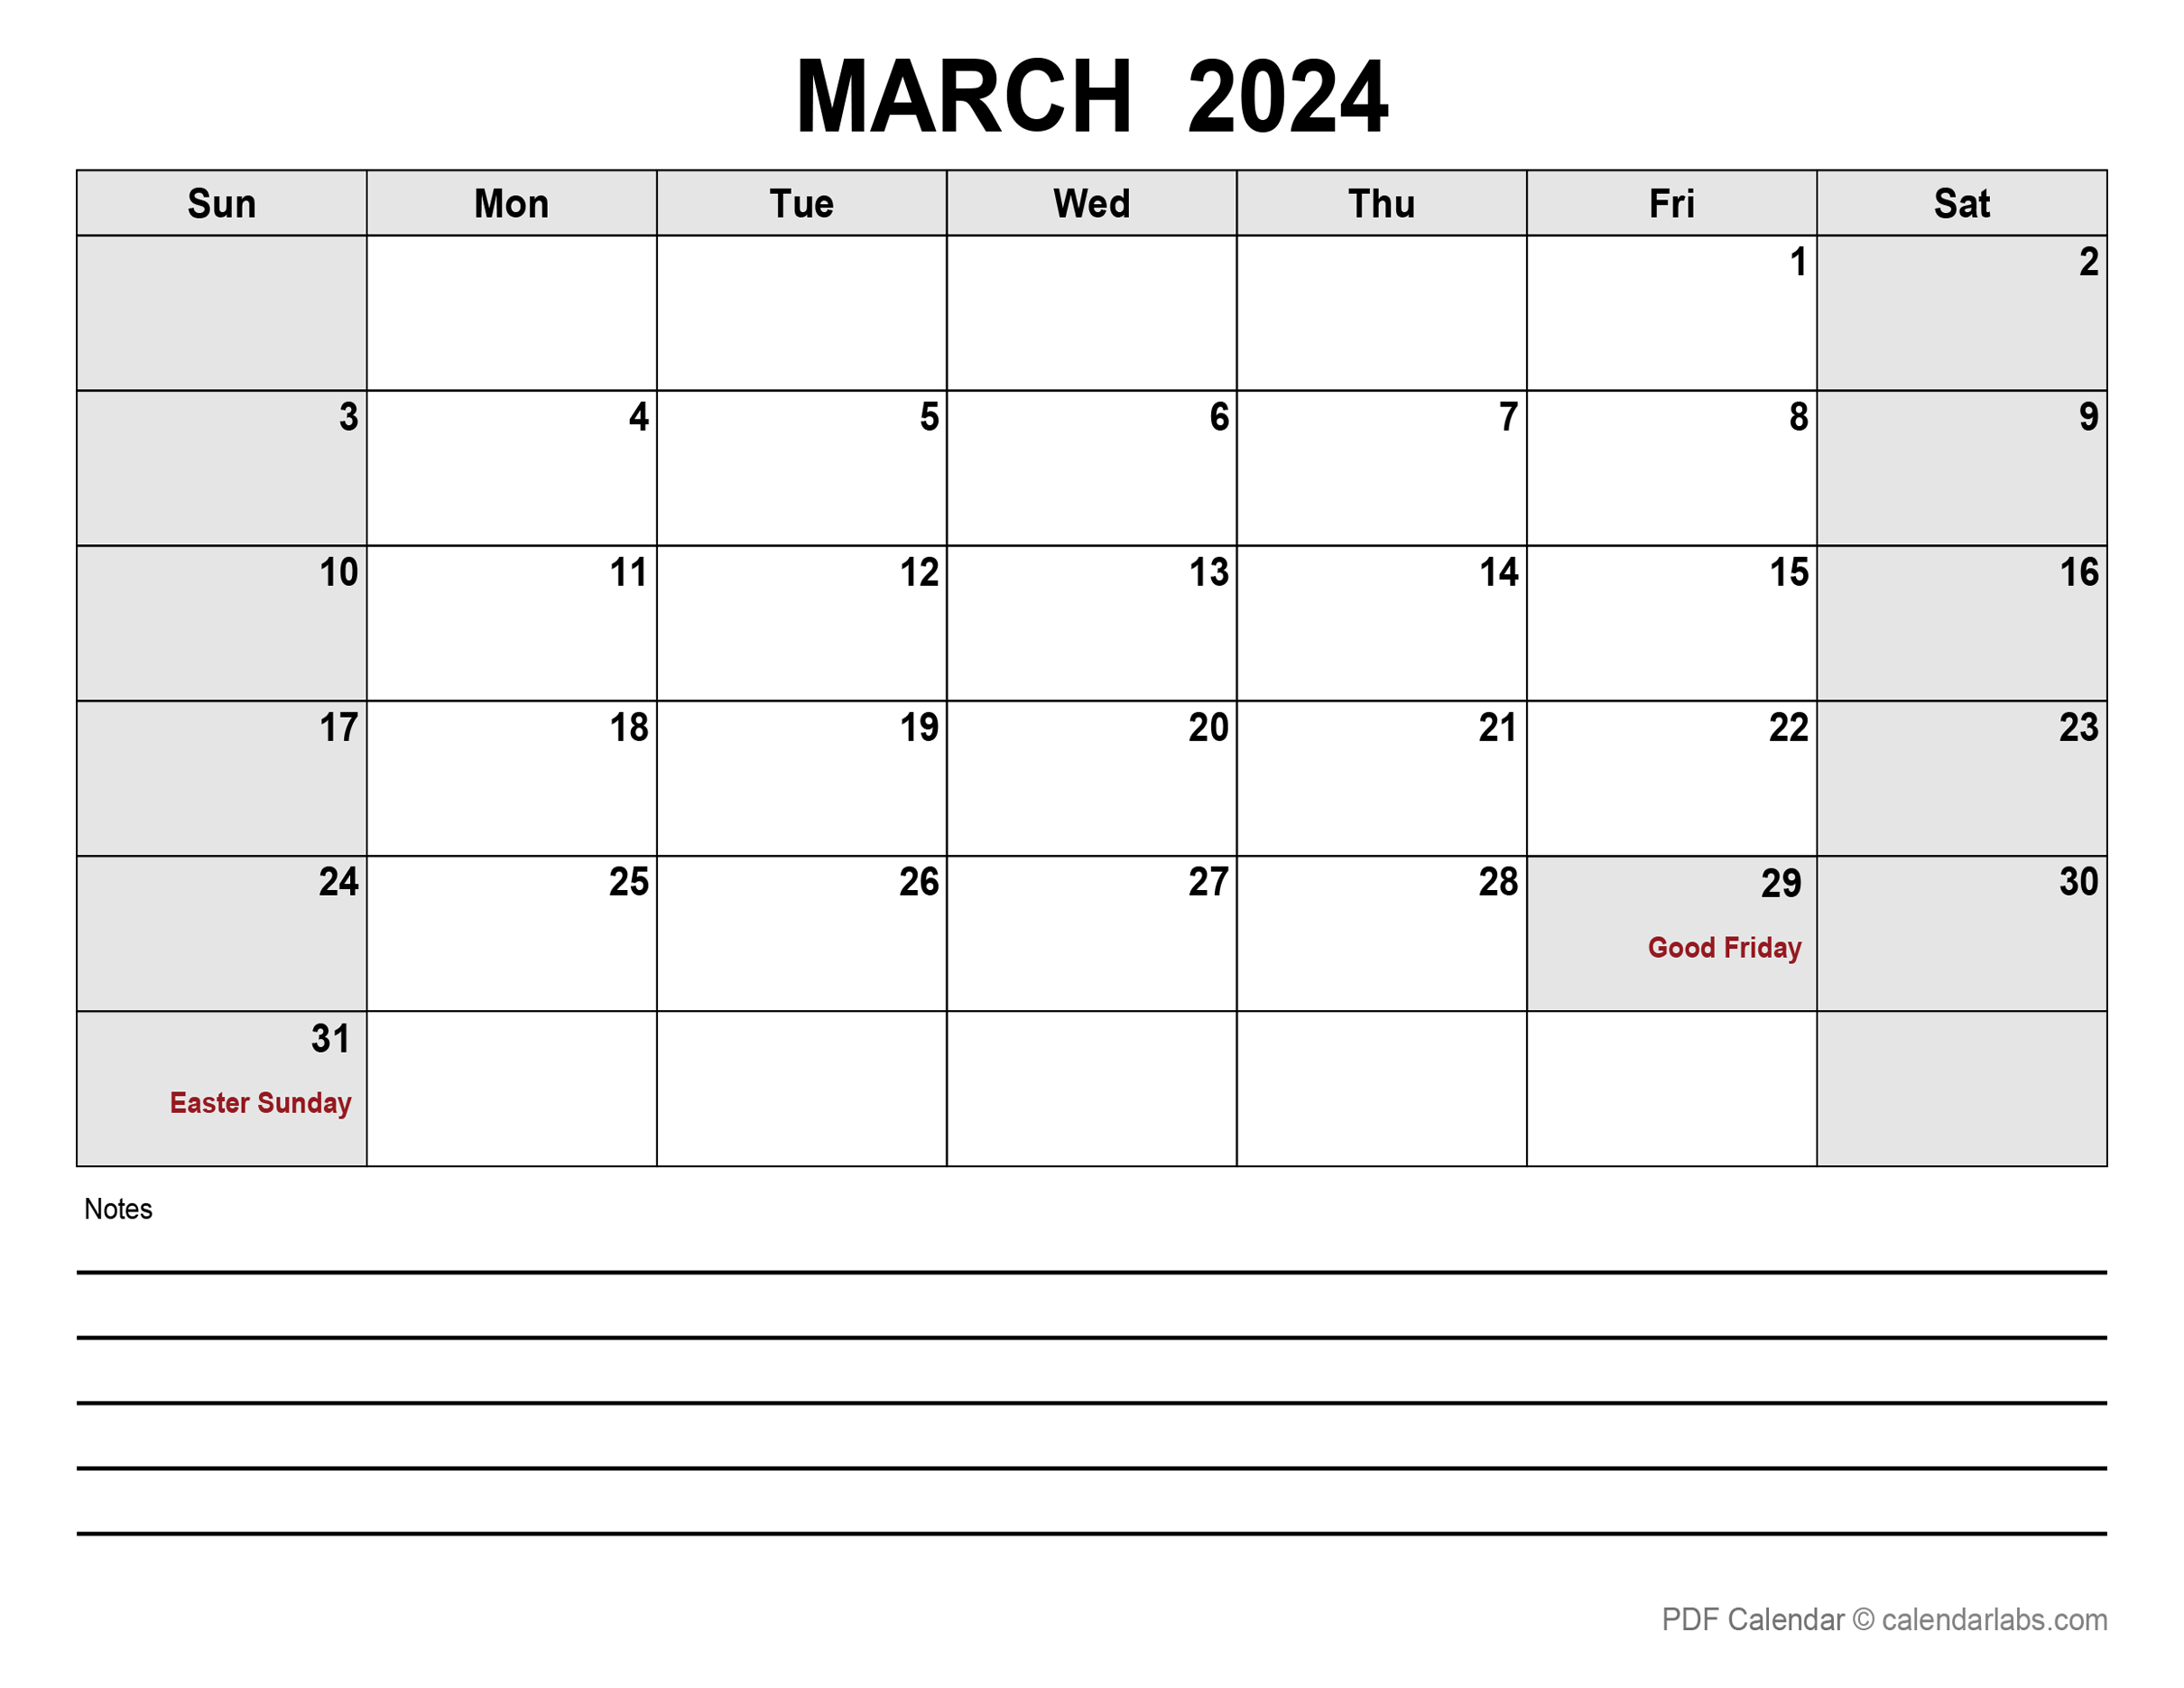 March 2024 Calendar with Holidays CalendarLabs